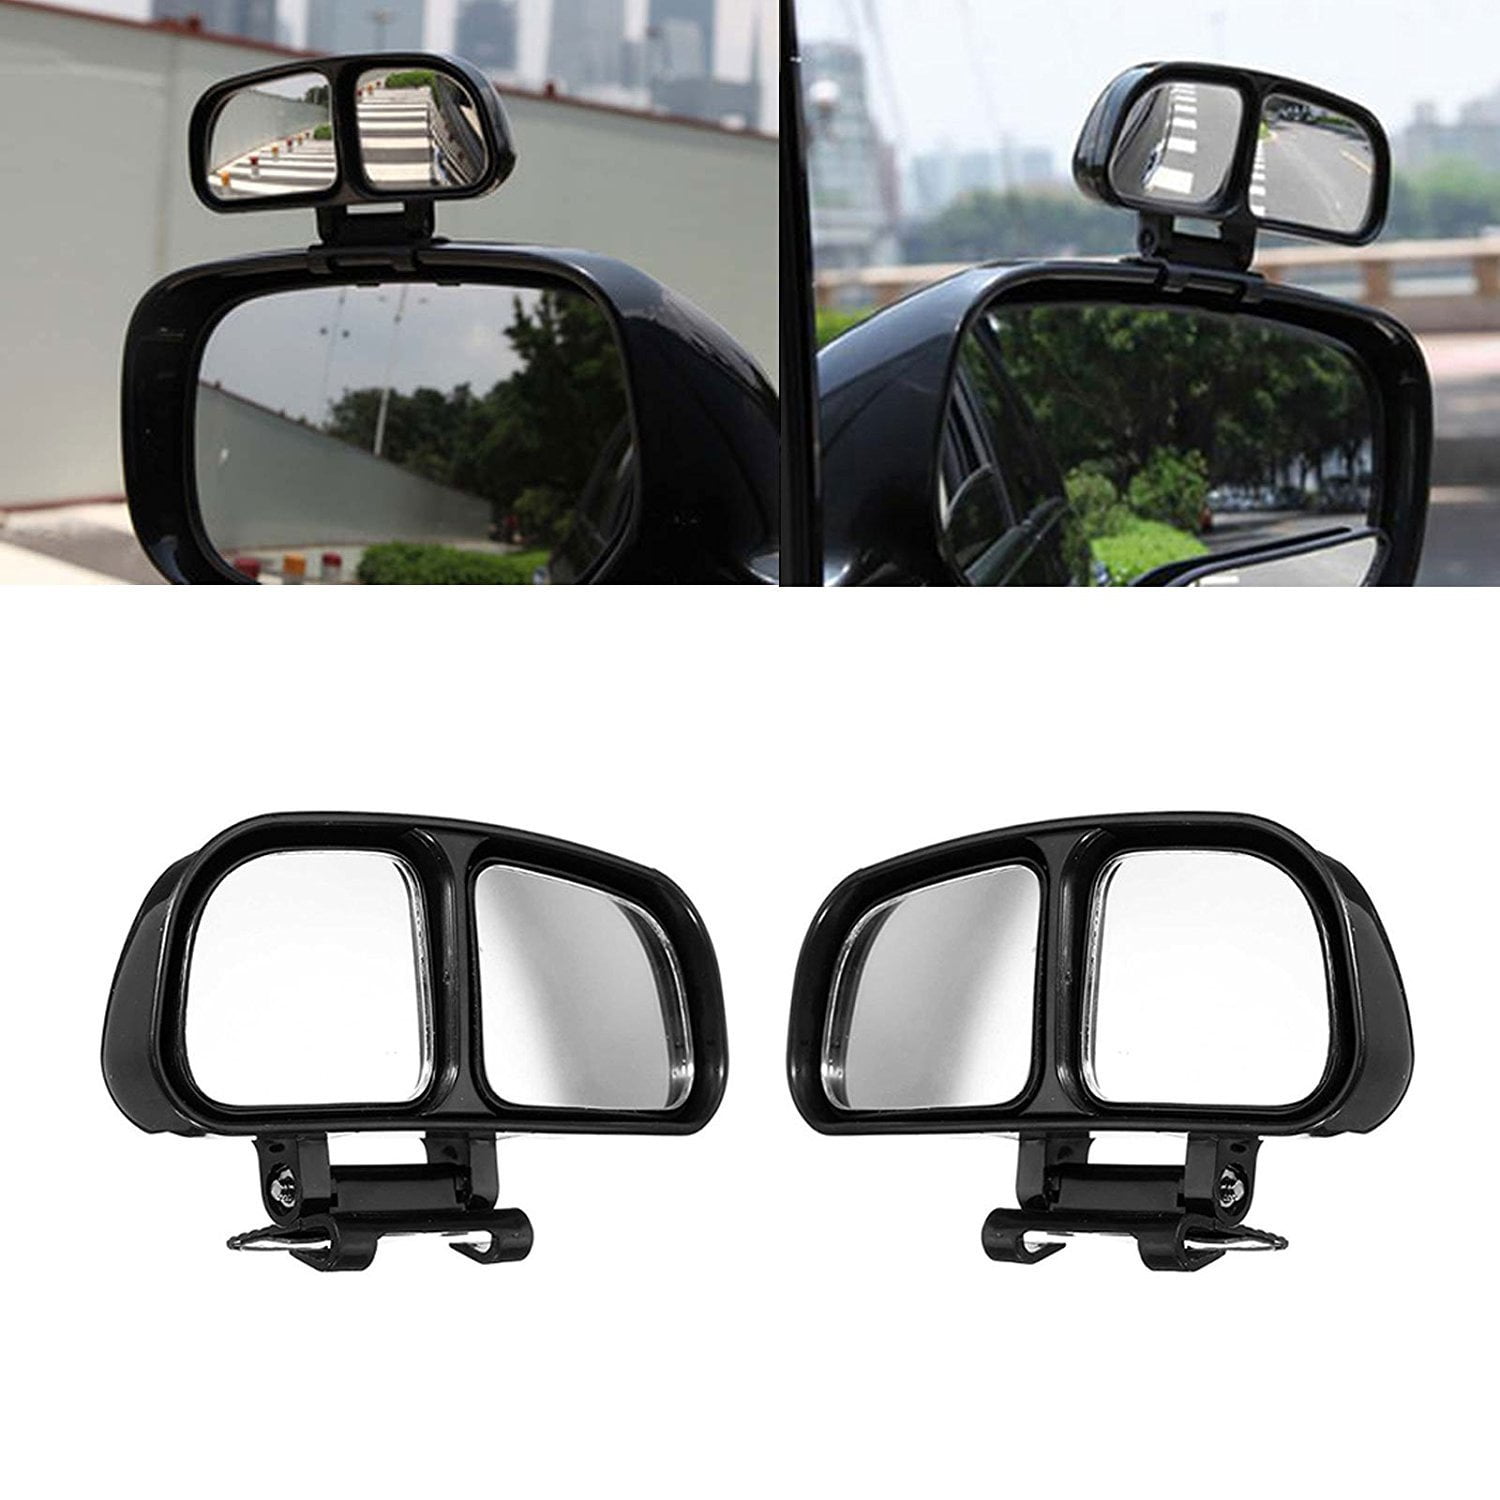 Black Half Oval Side Rear View Auxiliary Blind Spot Mirror for Car Automotive